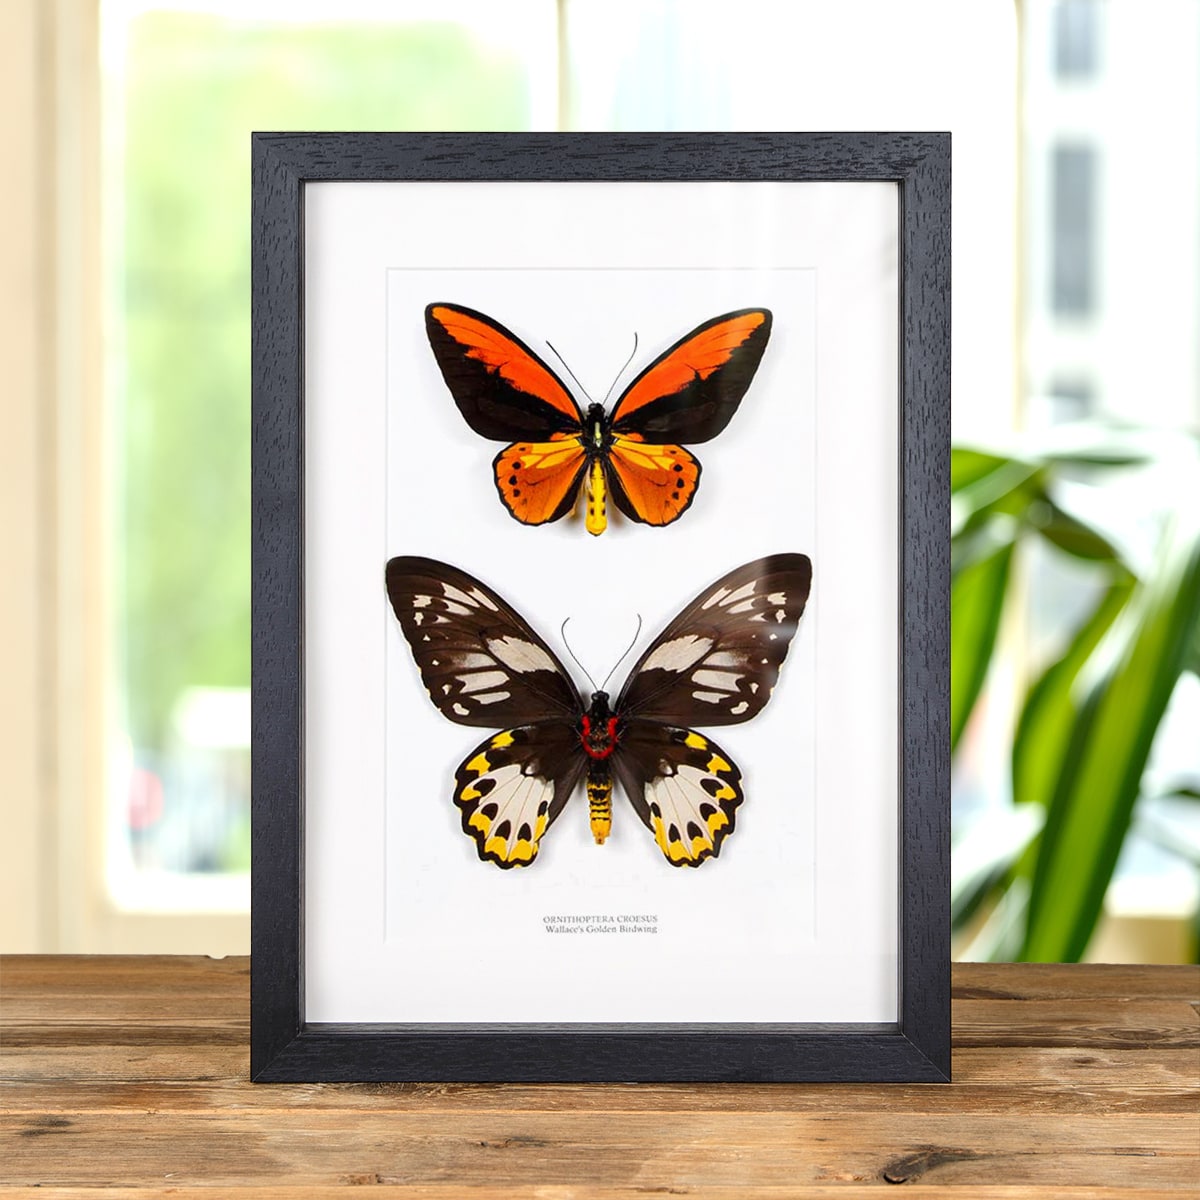 Minibeast Wallace's Golden Birdwing Pair in Box Frame (Ornithoptera croesus)